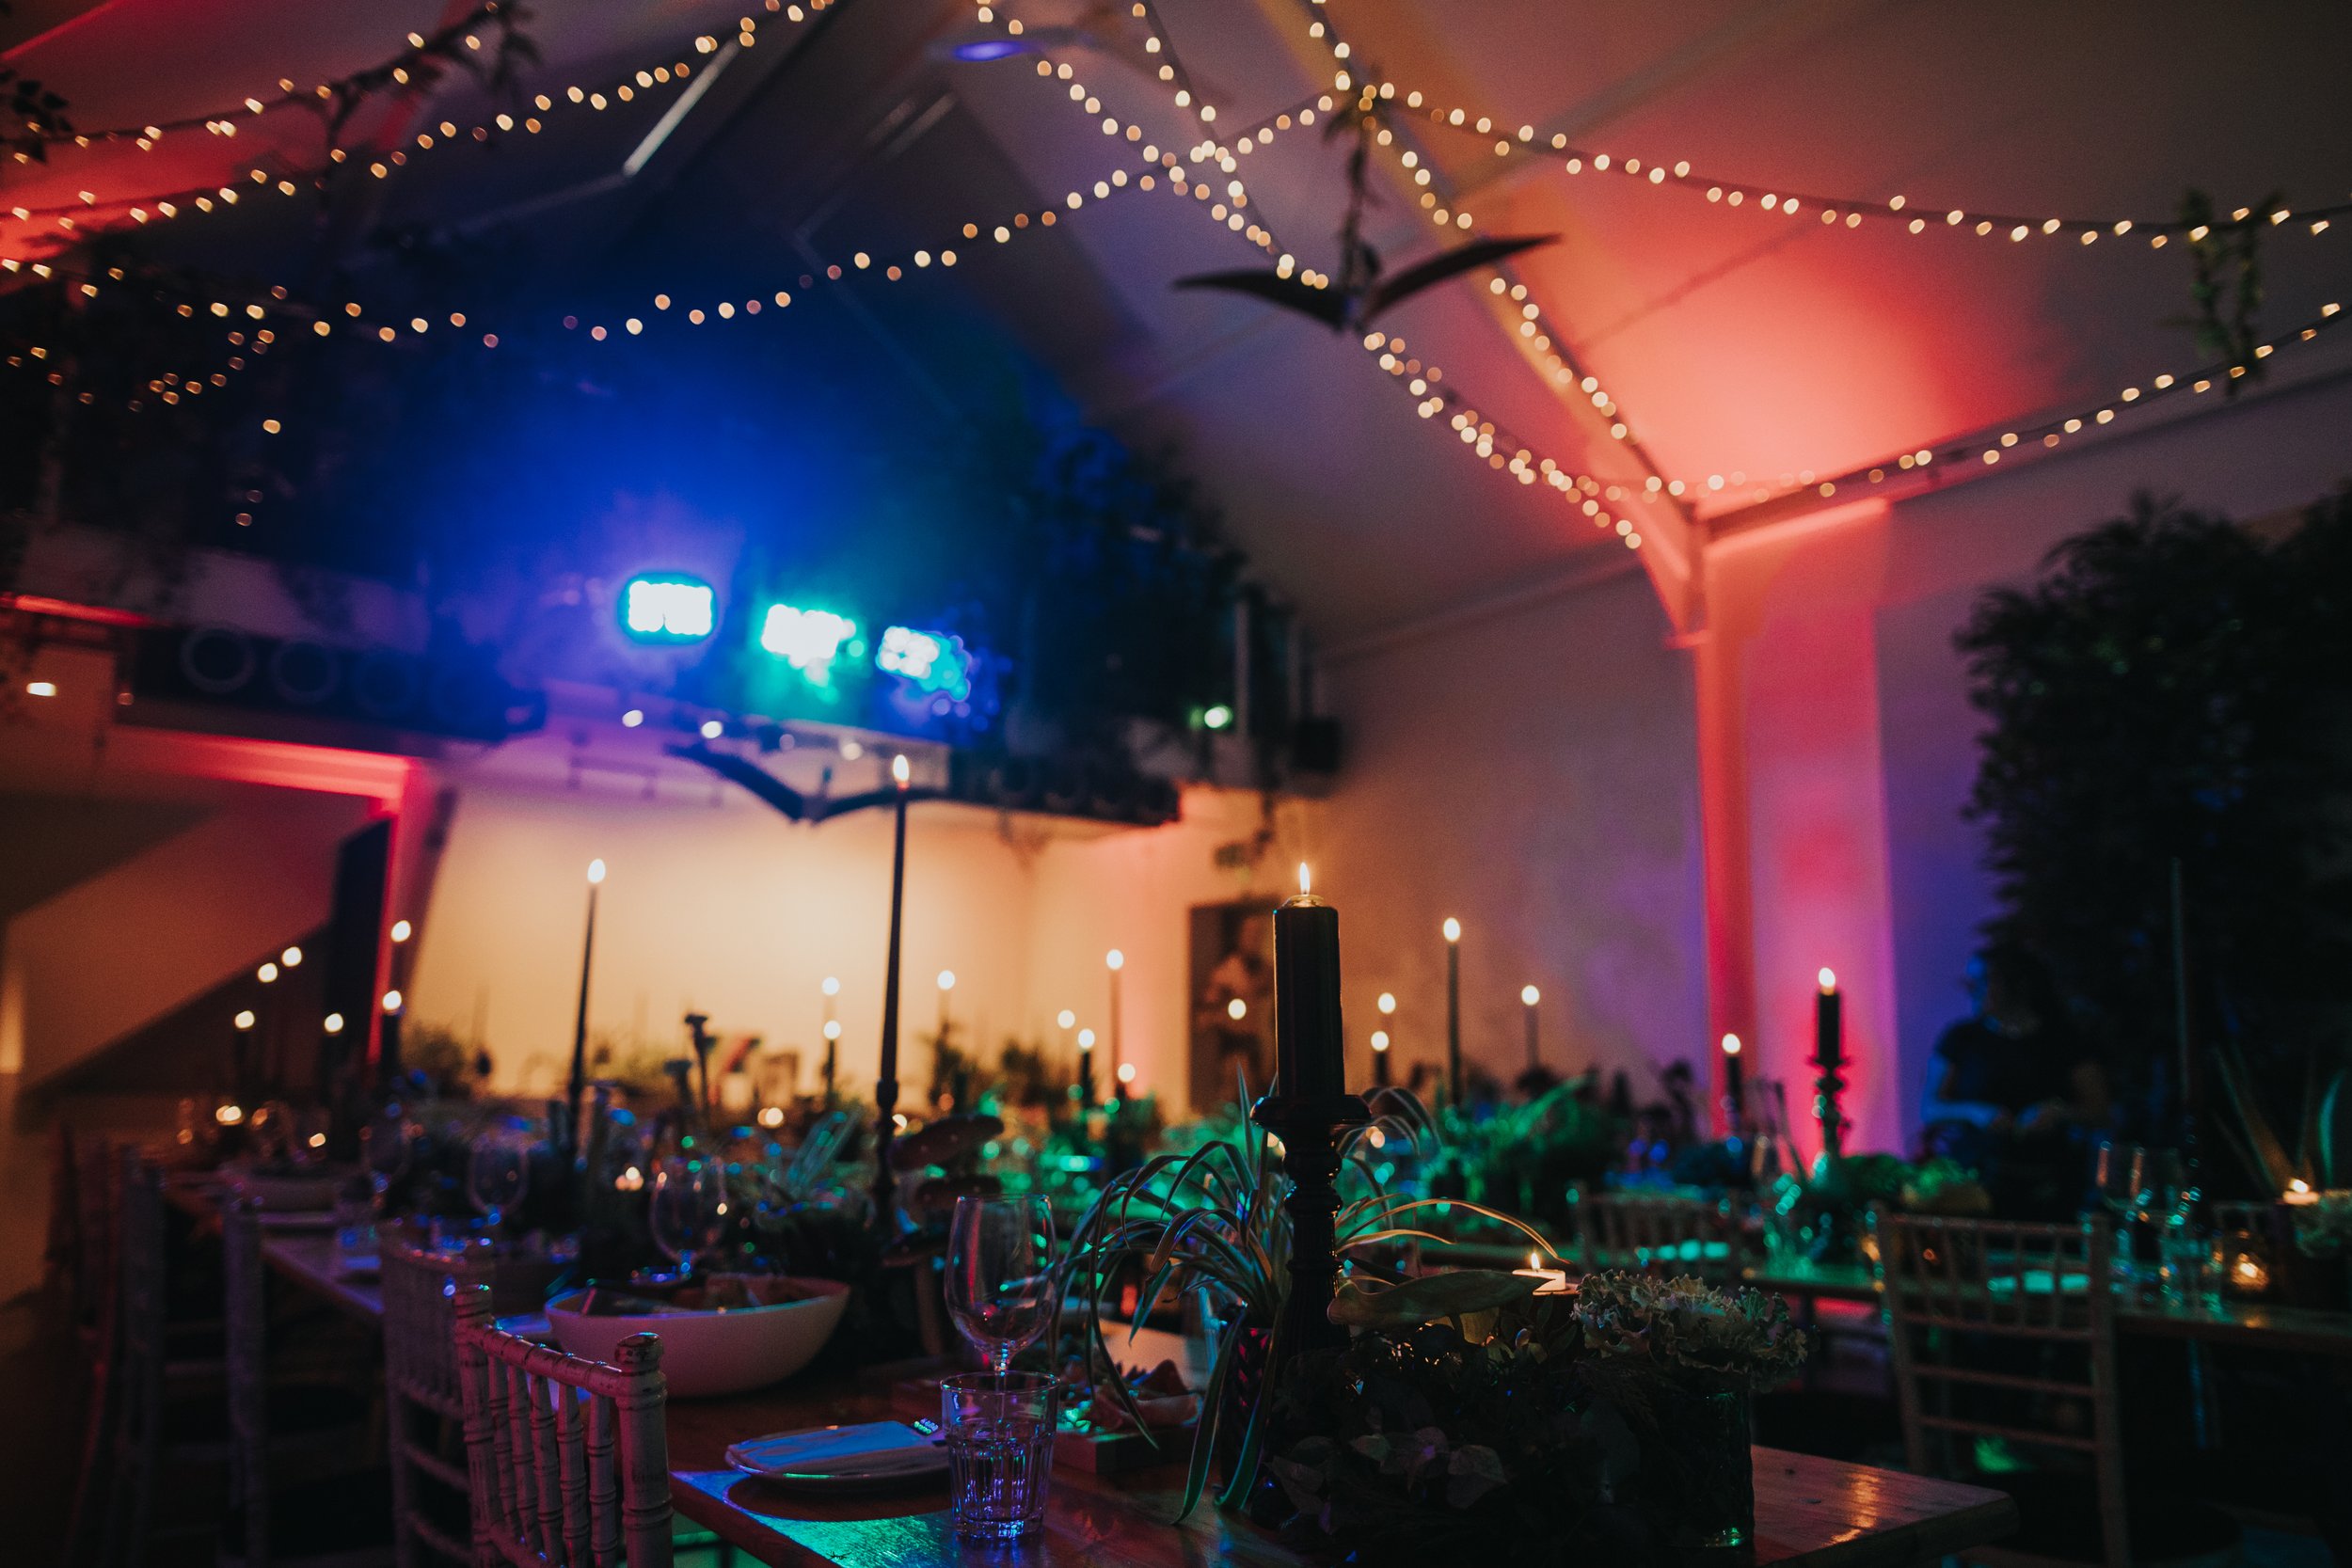 Dramatically lit banquet hall in blue, pink, yellow and green. 